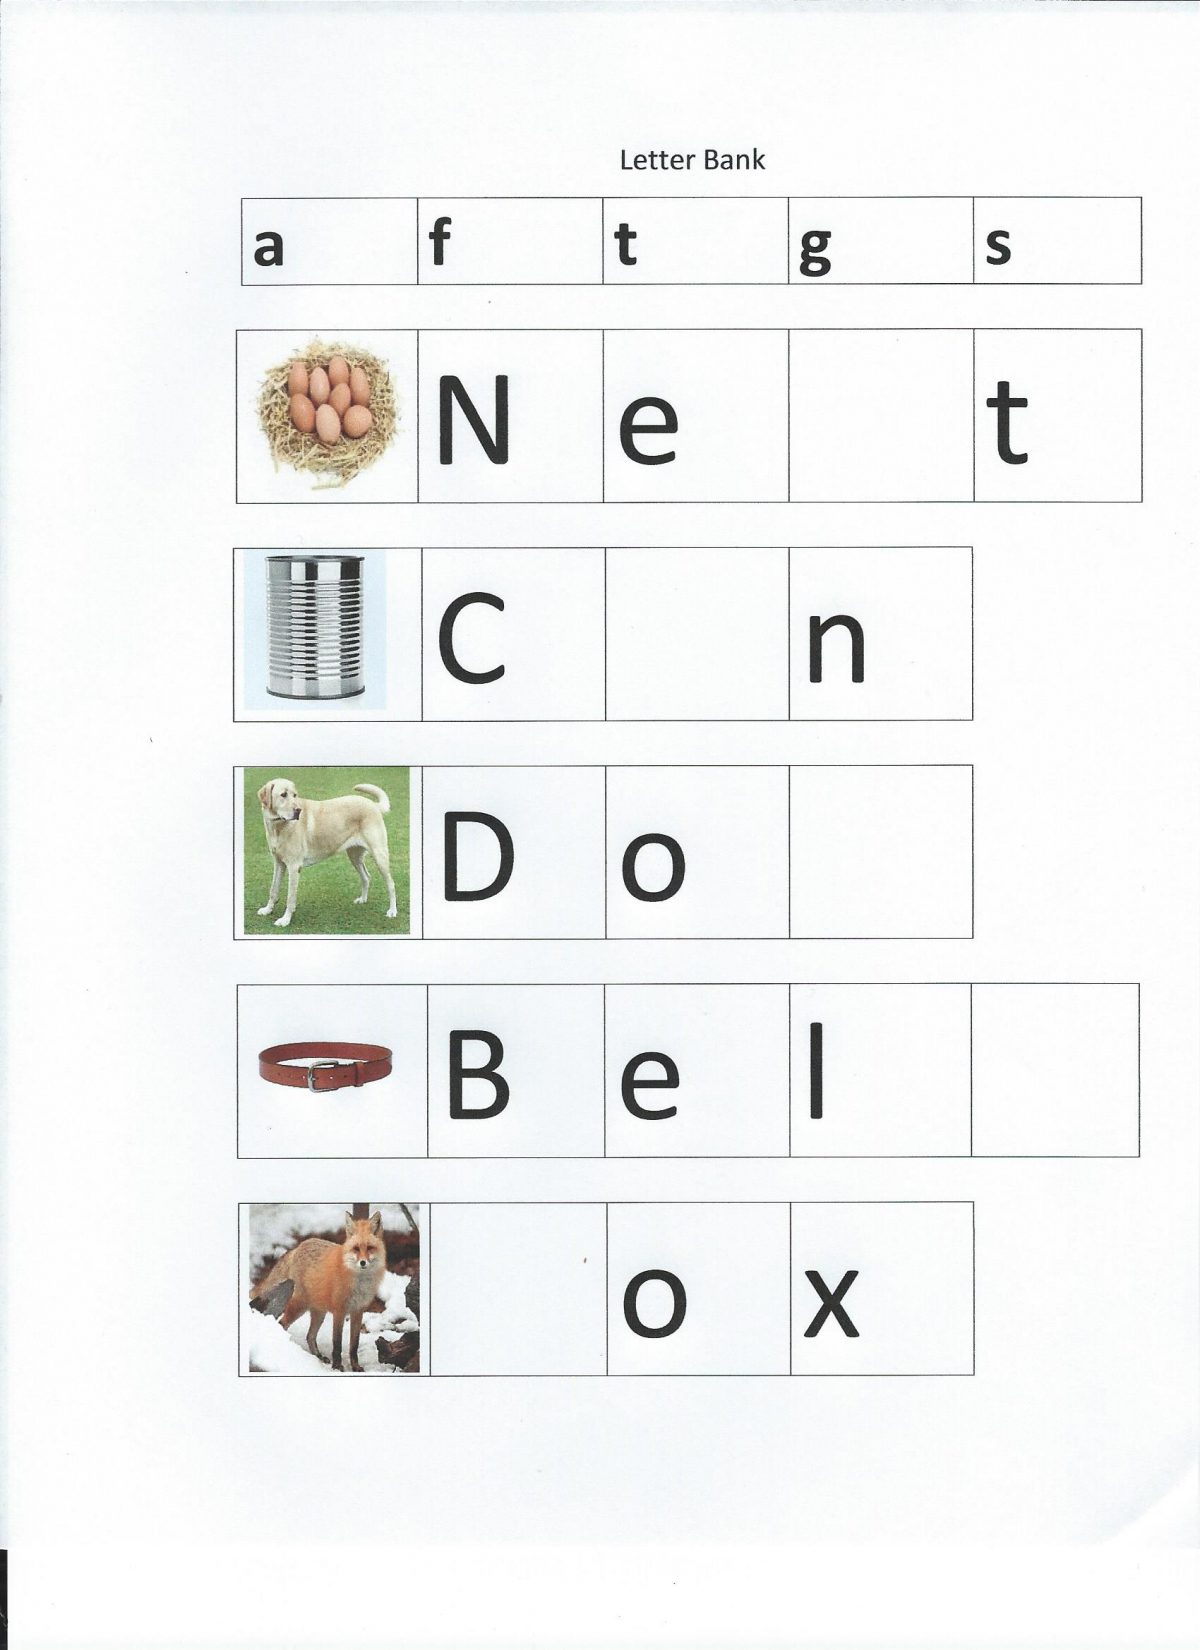 Why are alphabet worksheets effective tools for children?